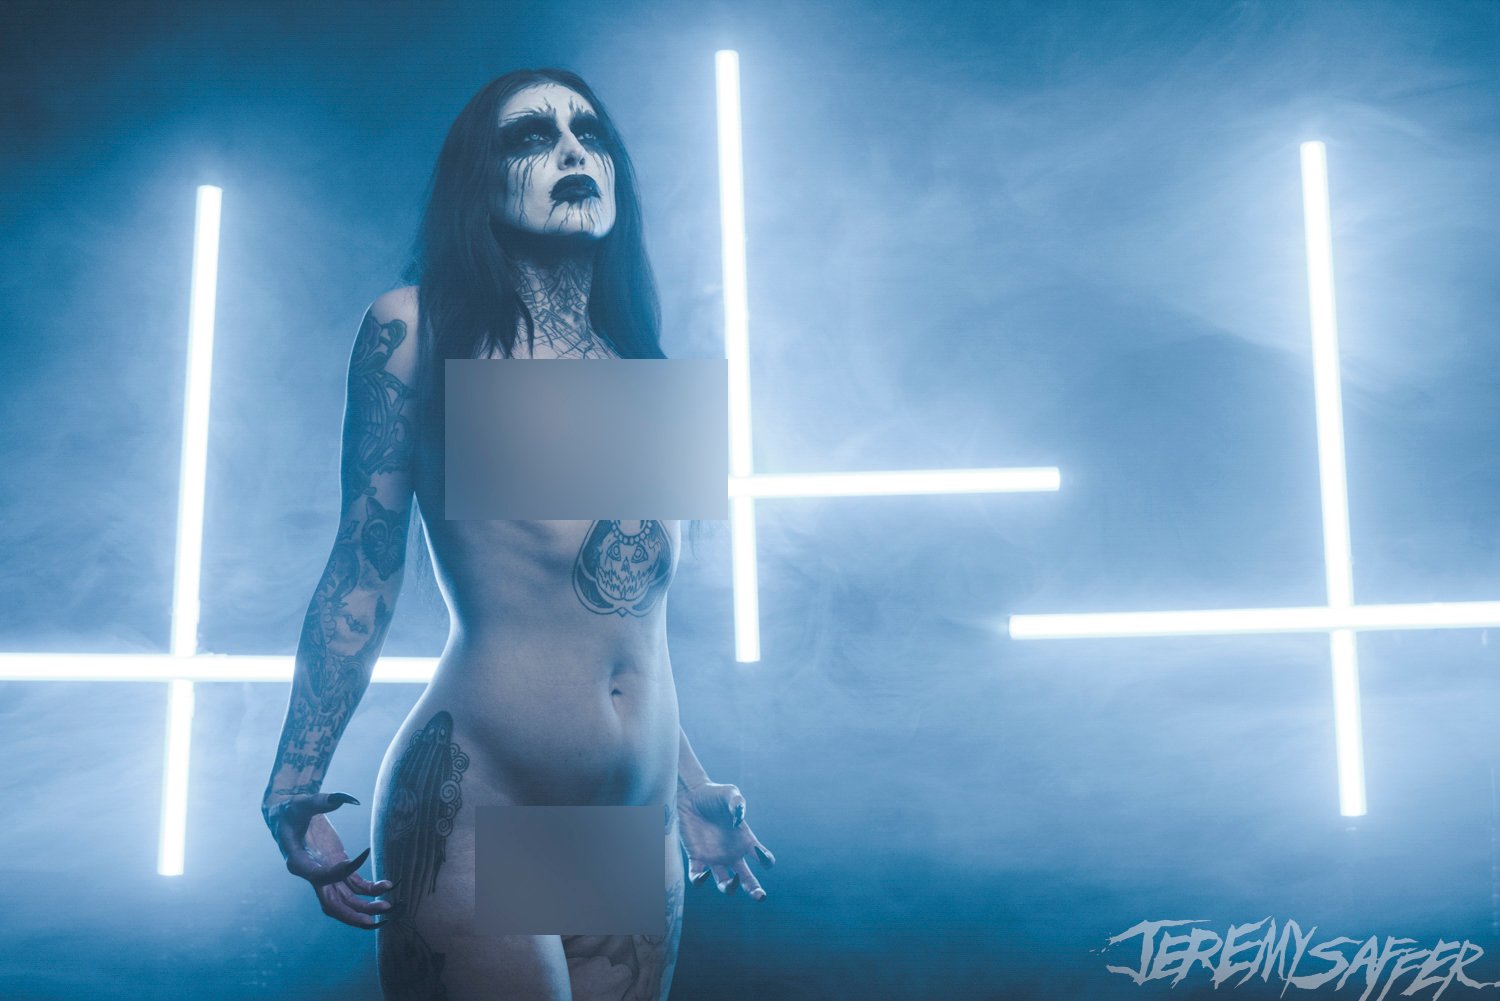 Black Metal Babes Needed to Bare It All in Jeremy Saffer’s Next Daughters of Darkness Book